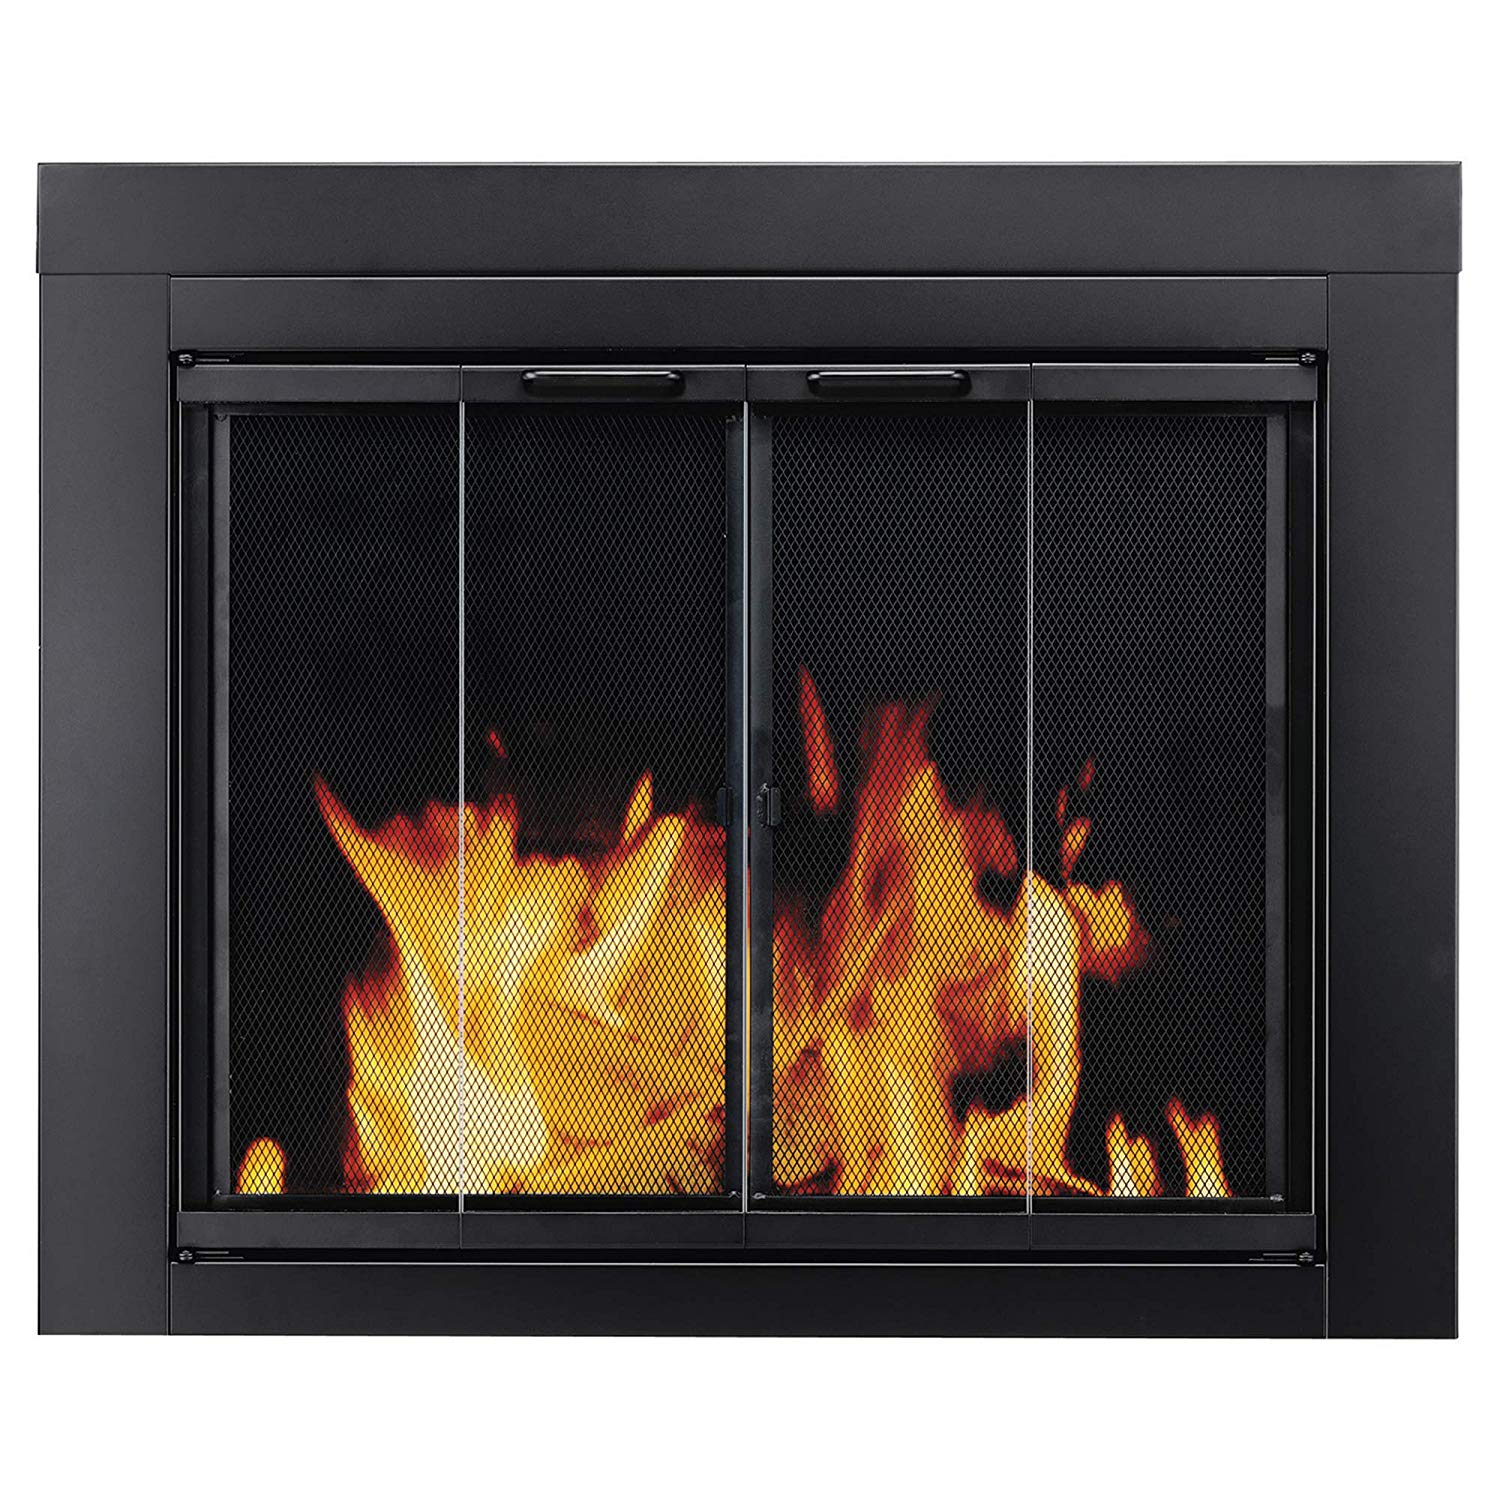 How to Install Fireplace Doors Awesome Pleasant Hearth at 1000 ascot Fireplace Glass Door Black Small